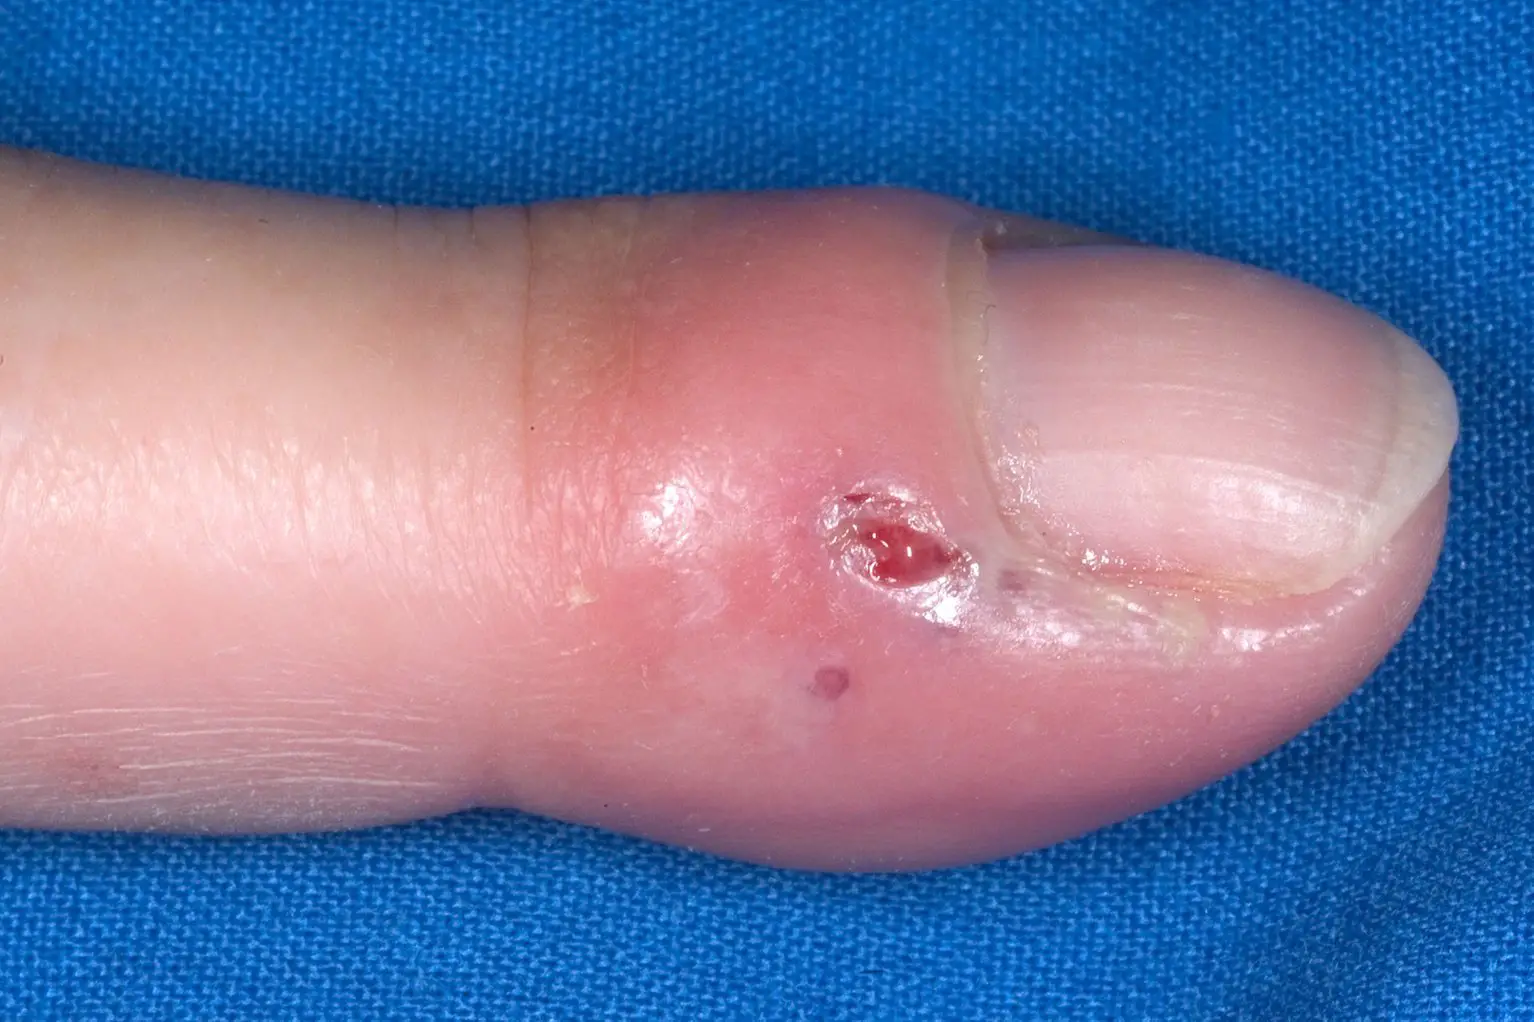 Herpetic whitlow (whitlow finger)